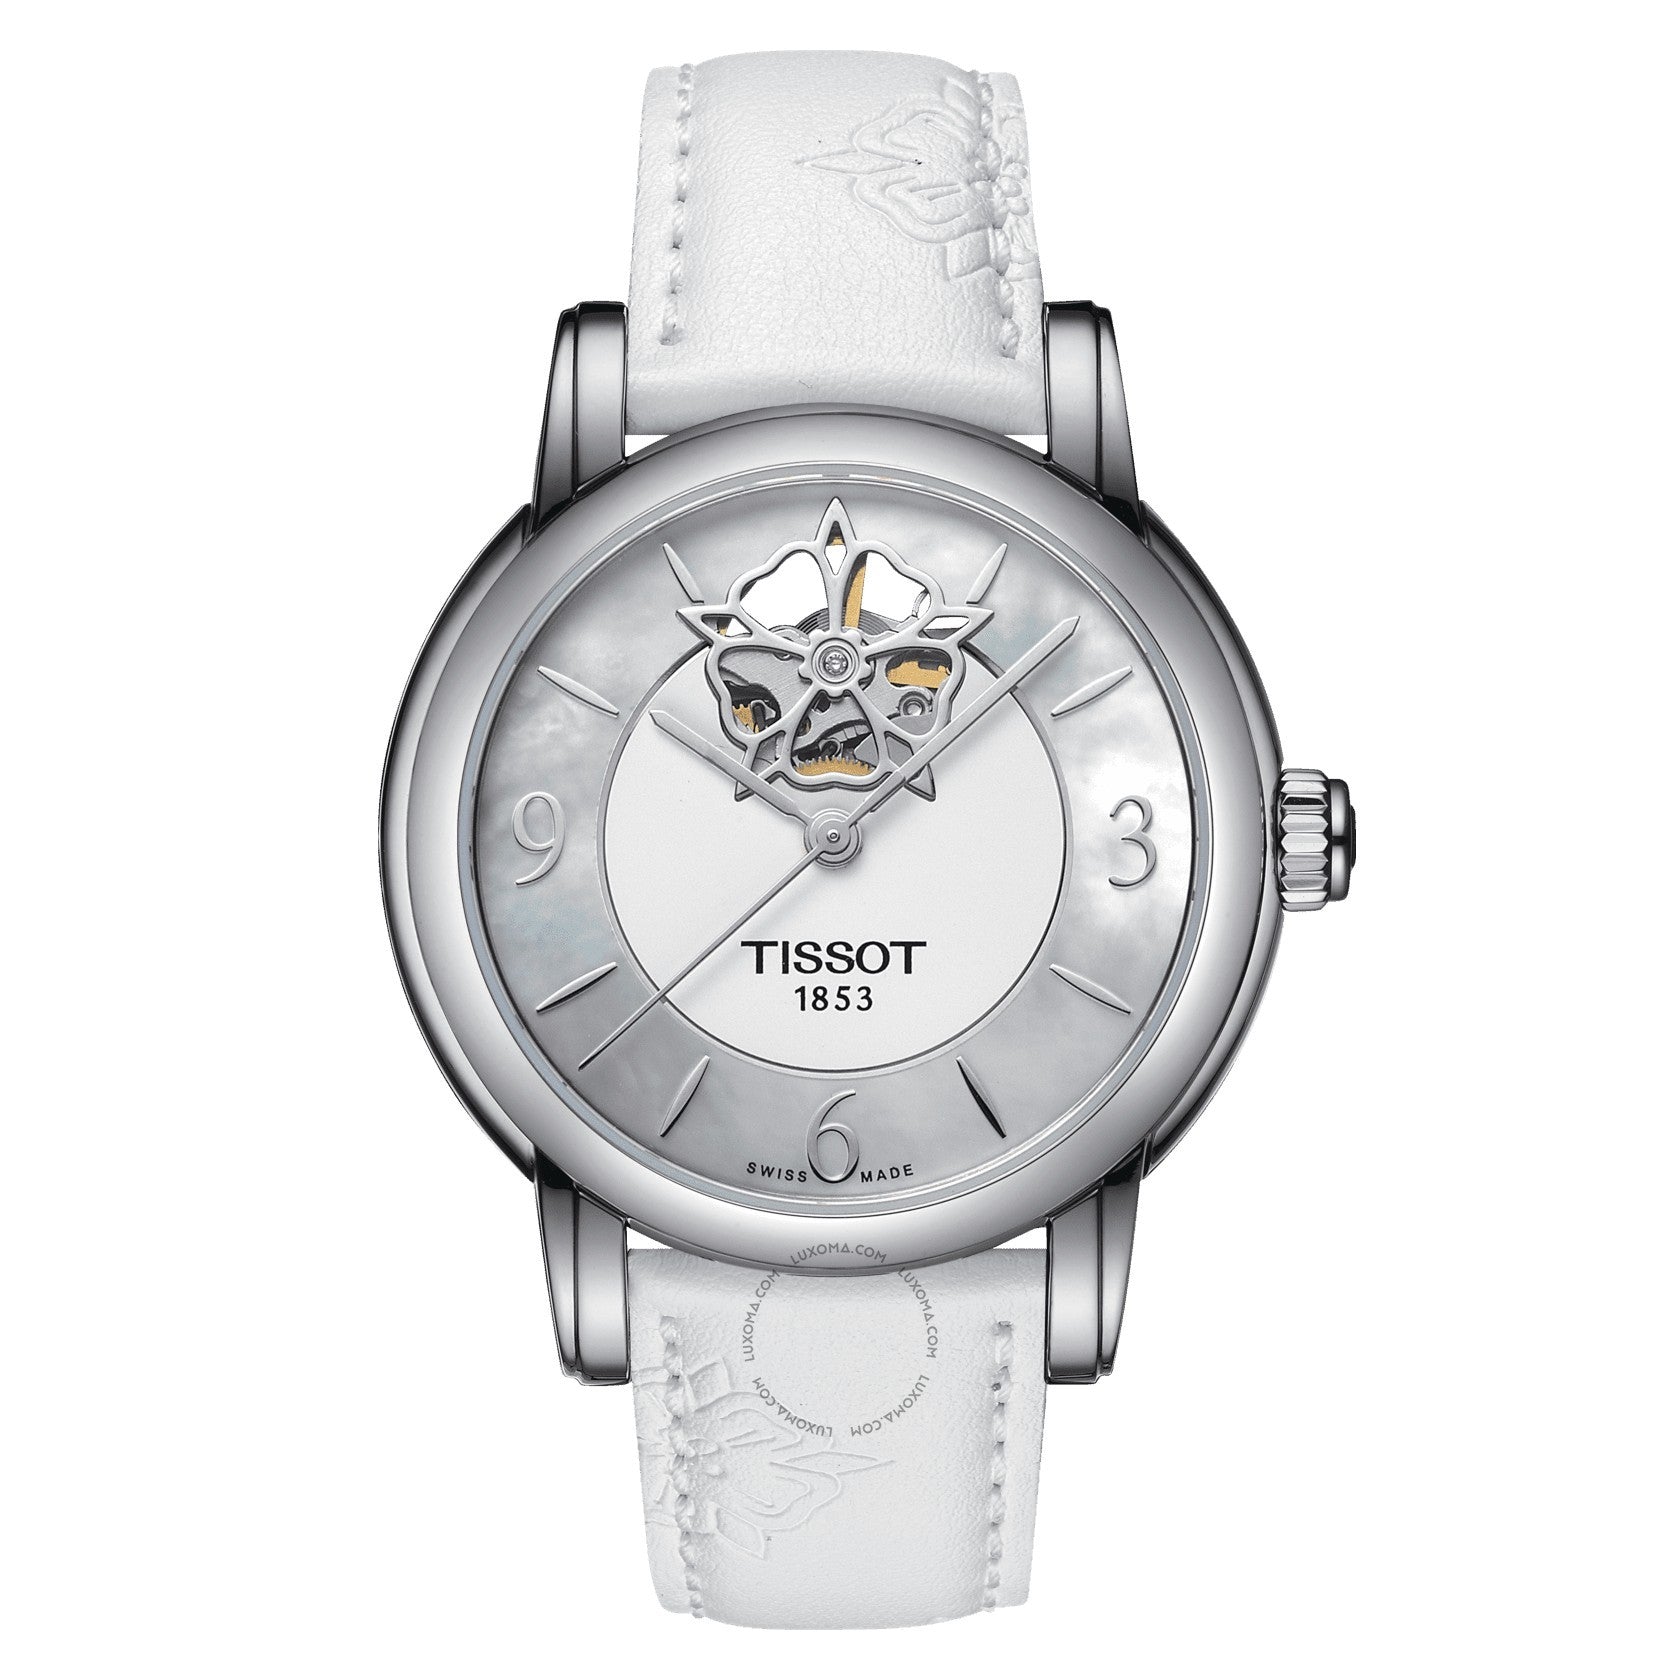 Tissot Lady Heart Automatic Mother of Pearl (Open Heart) Dial Ladies Watch T050.207.17.117.04